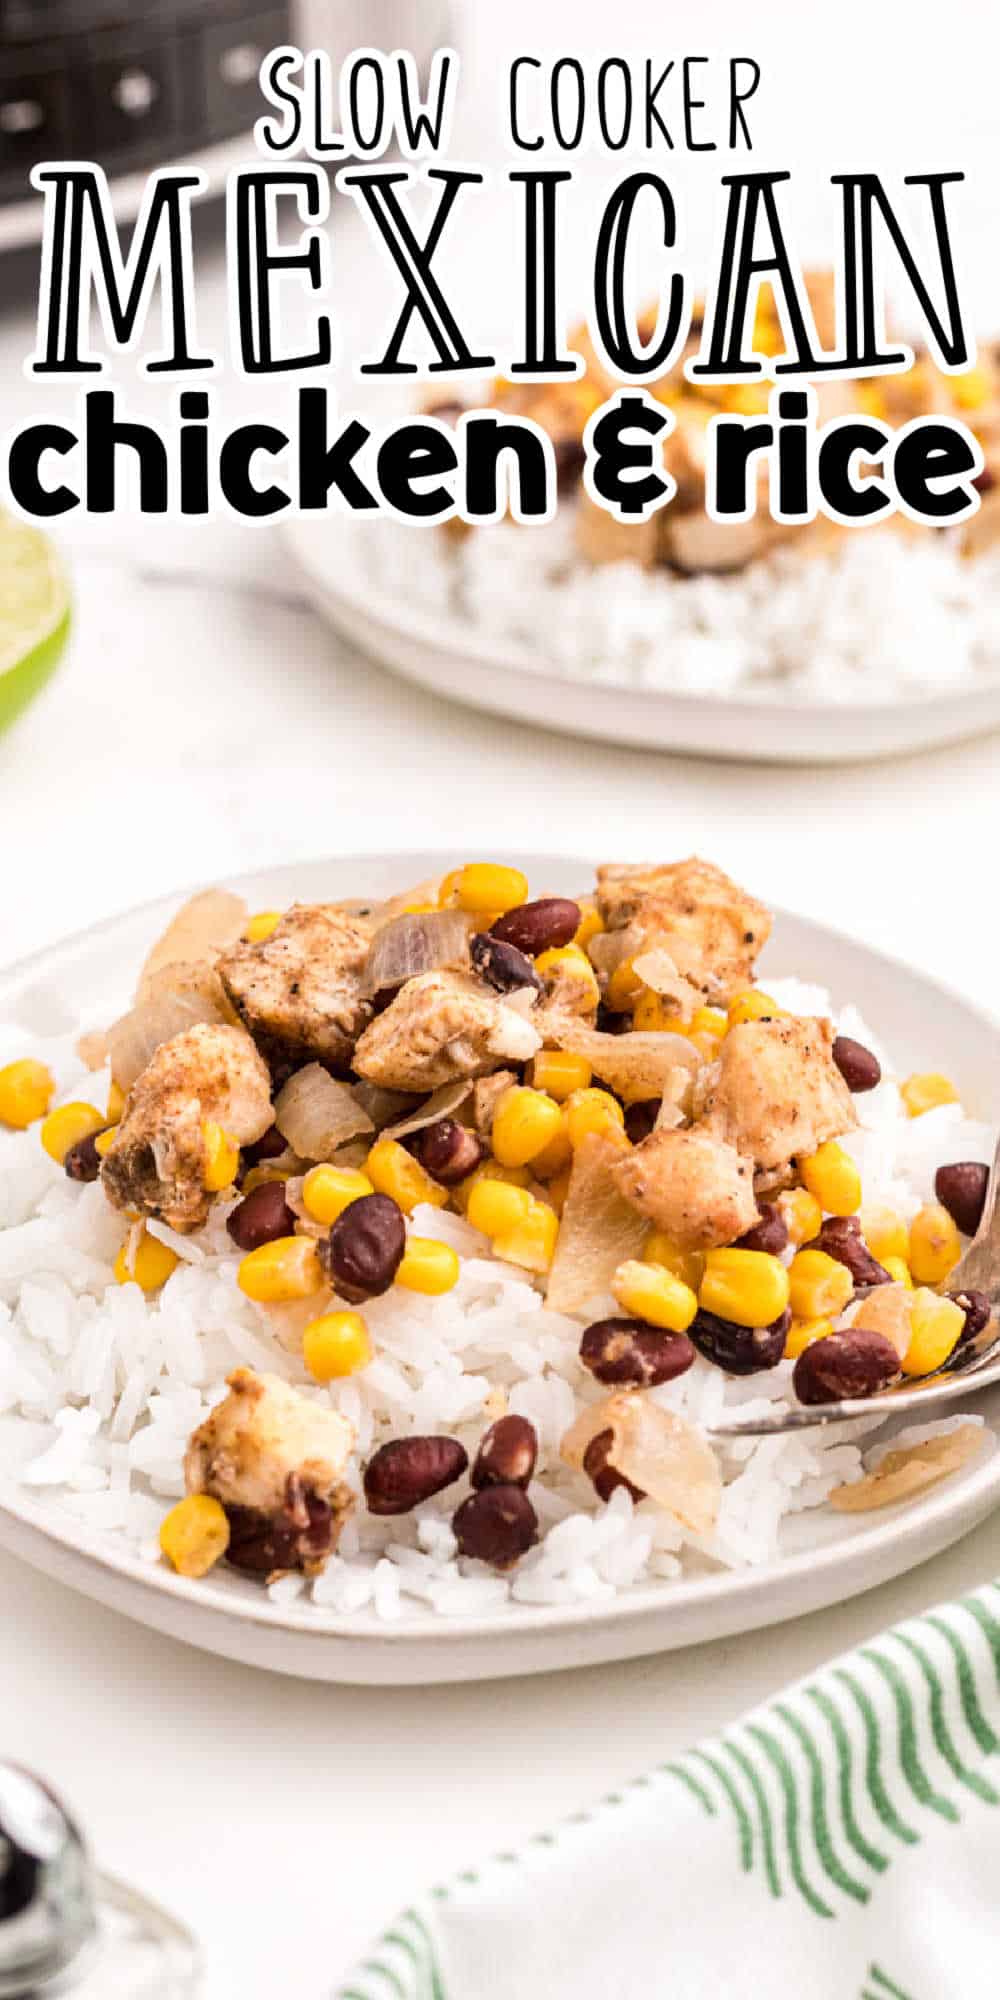 Slow Cooker Mexican Chicken and Rice • MidgetMomma